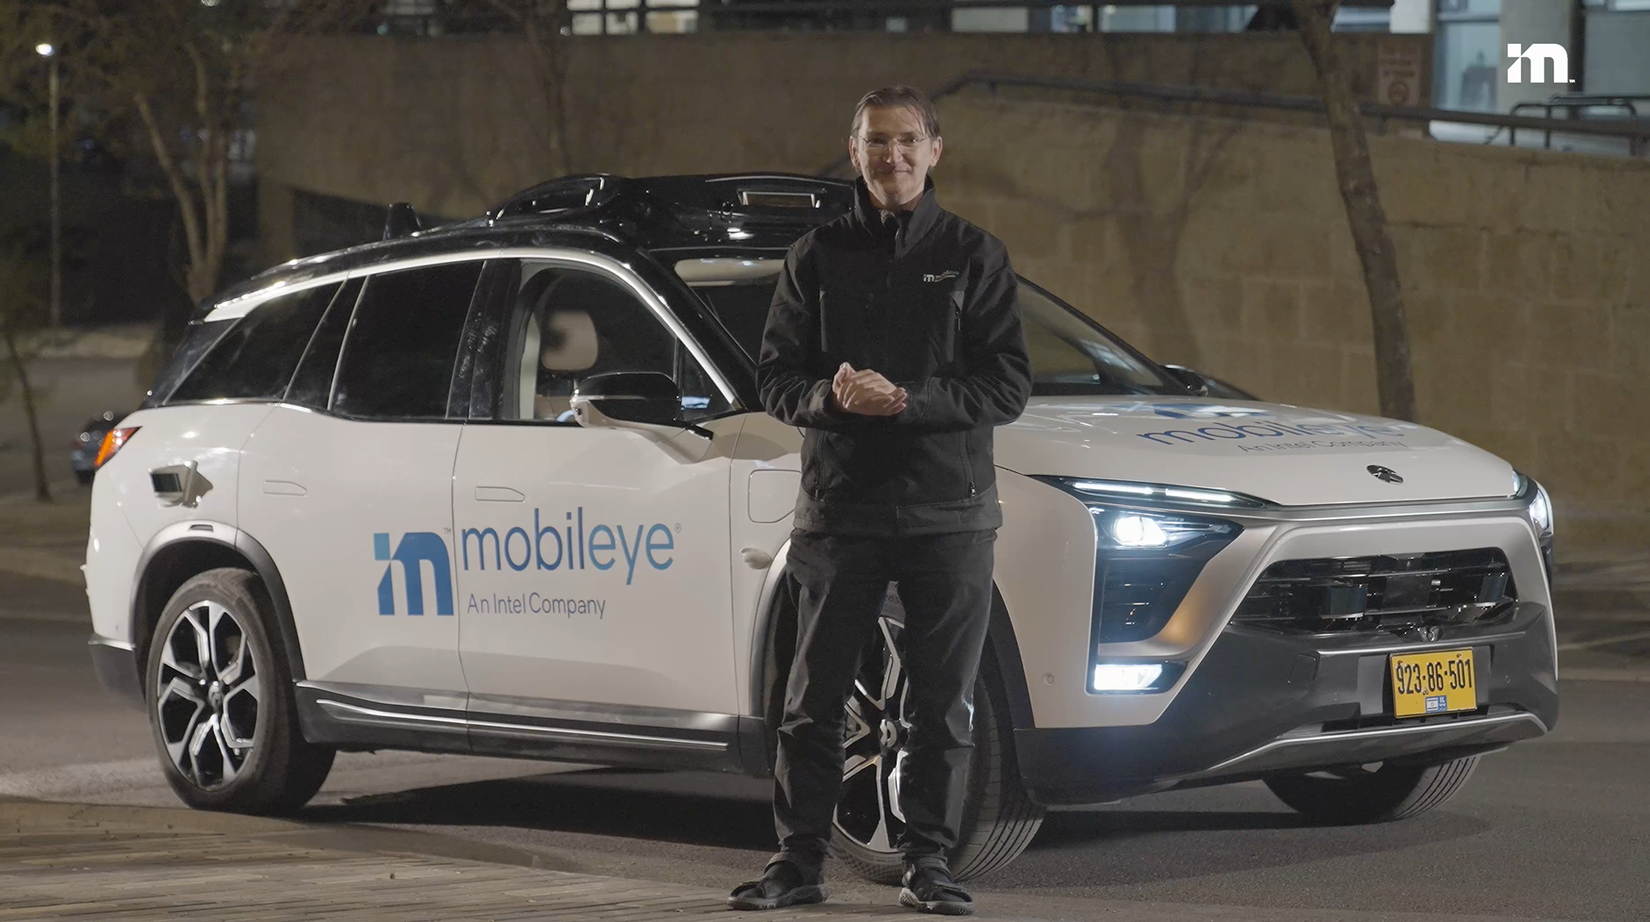 Johann "JJ" Jungwirth next to a Mobileye robotaxi at night in Jerusalem